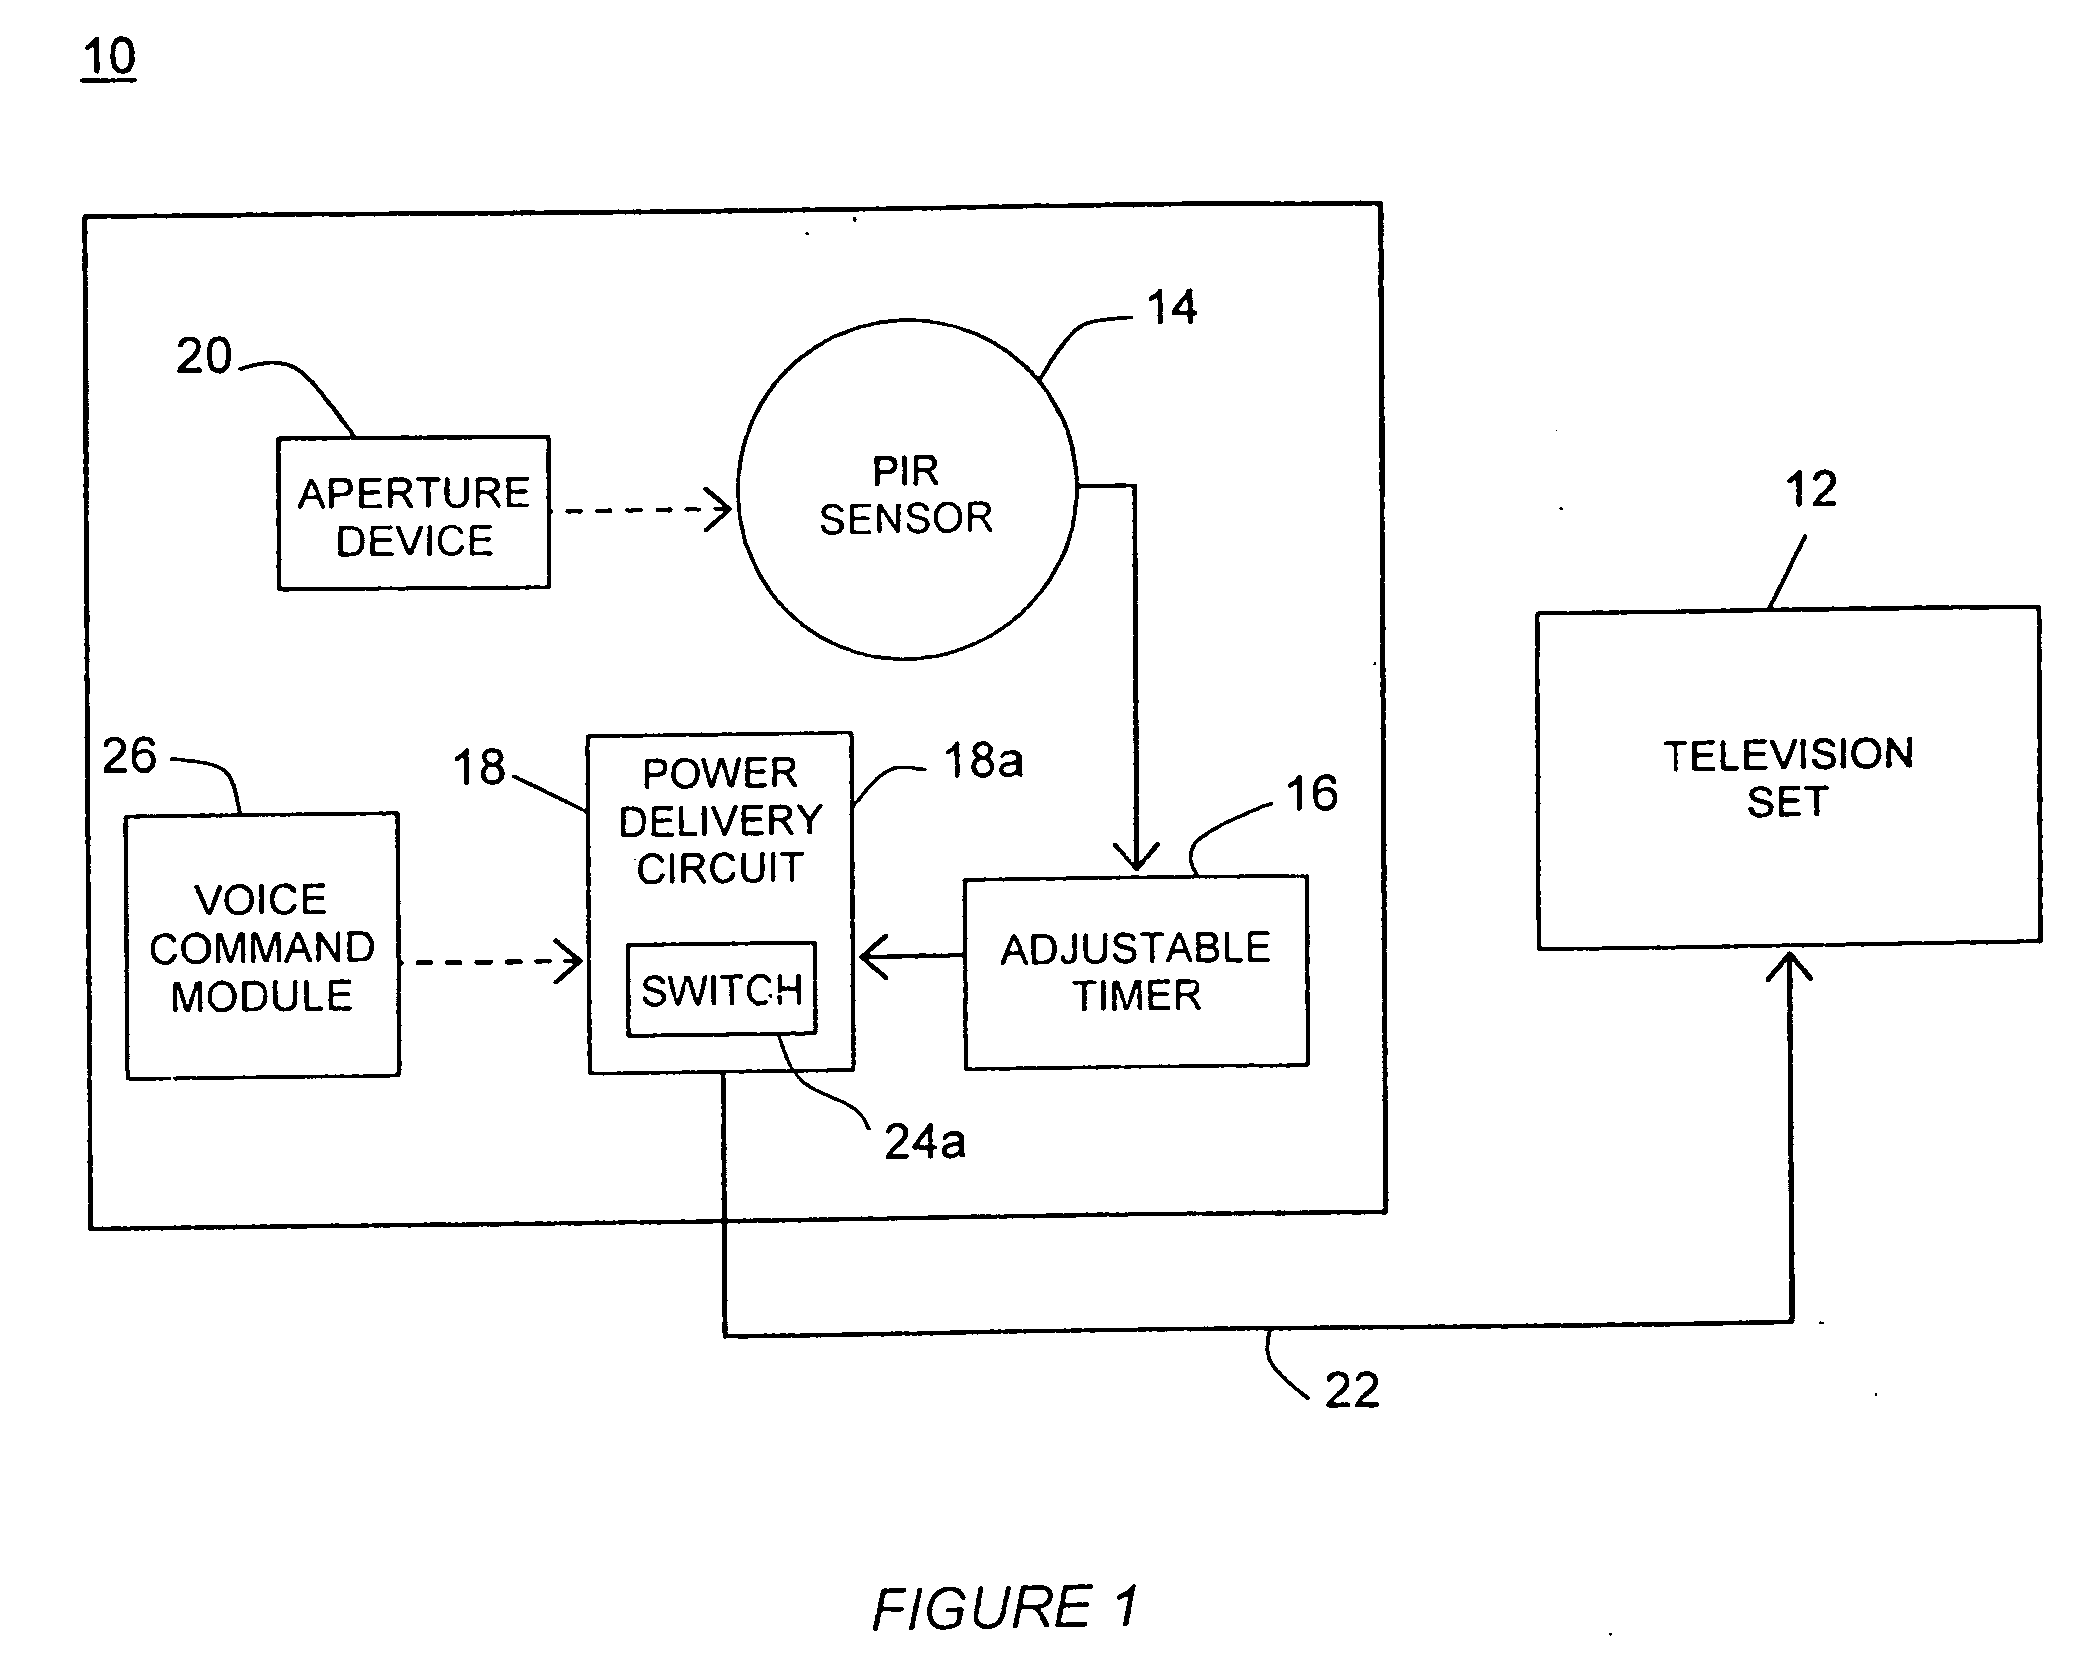 Infrared sensor unit for controlling operation of electrically powered appliances